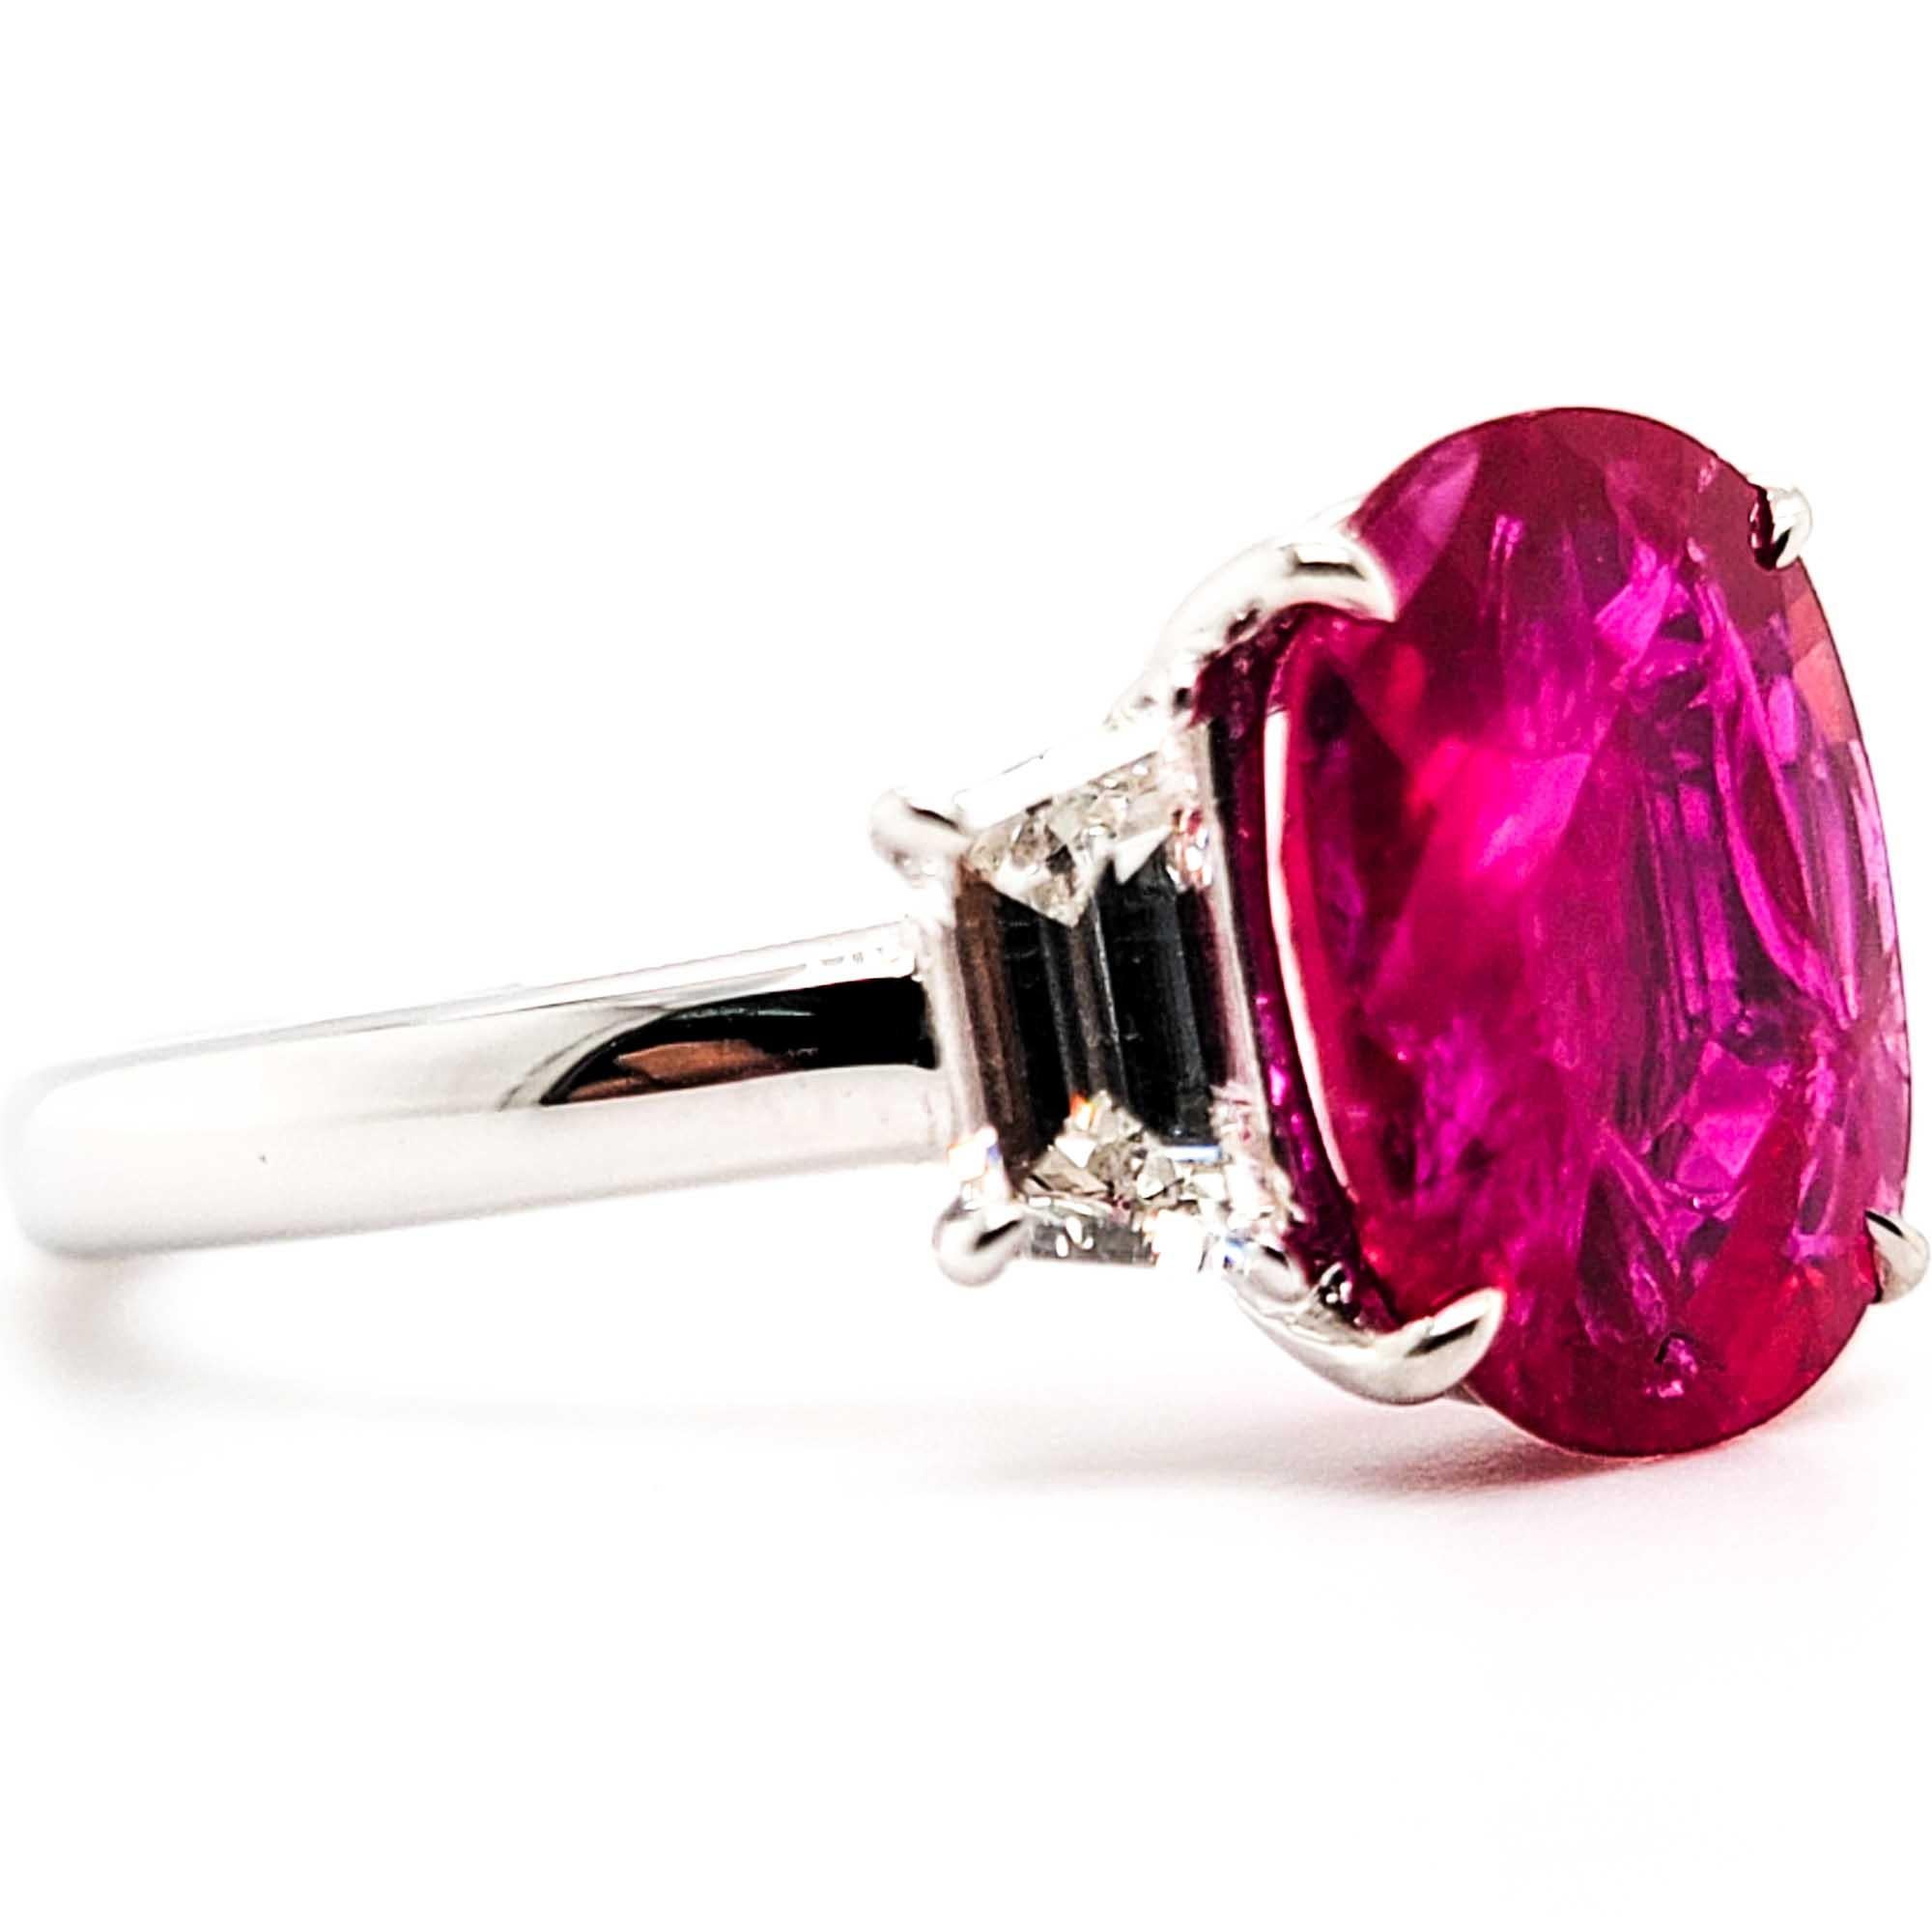 3.39 carat ruby ring with trapezoid diamonds on the side weighing 0.72 carats.